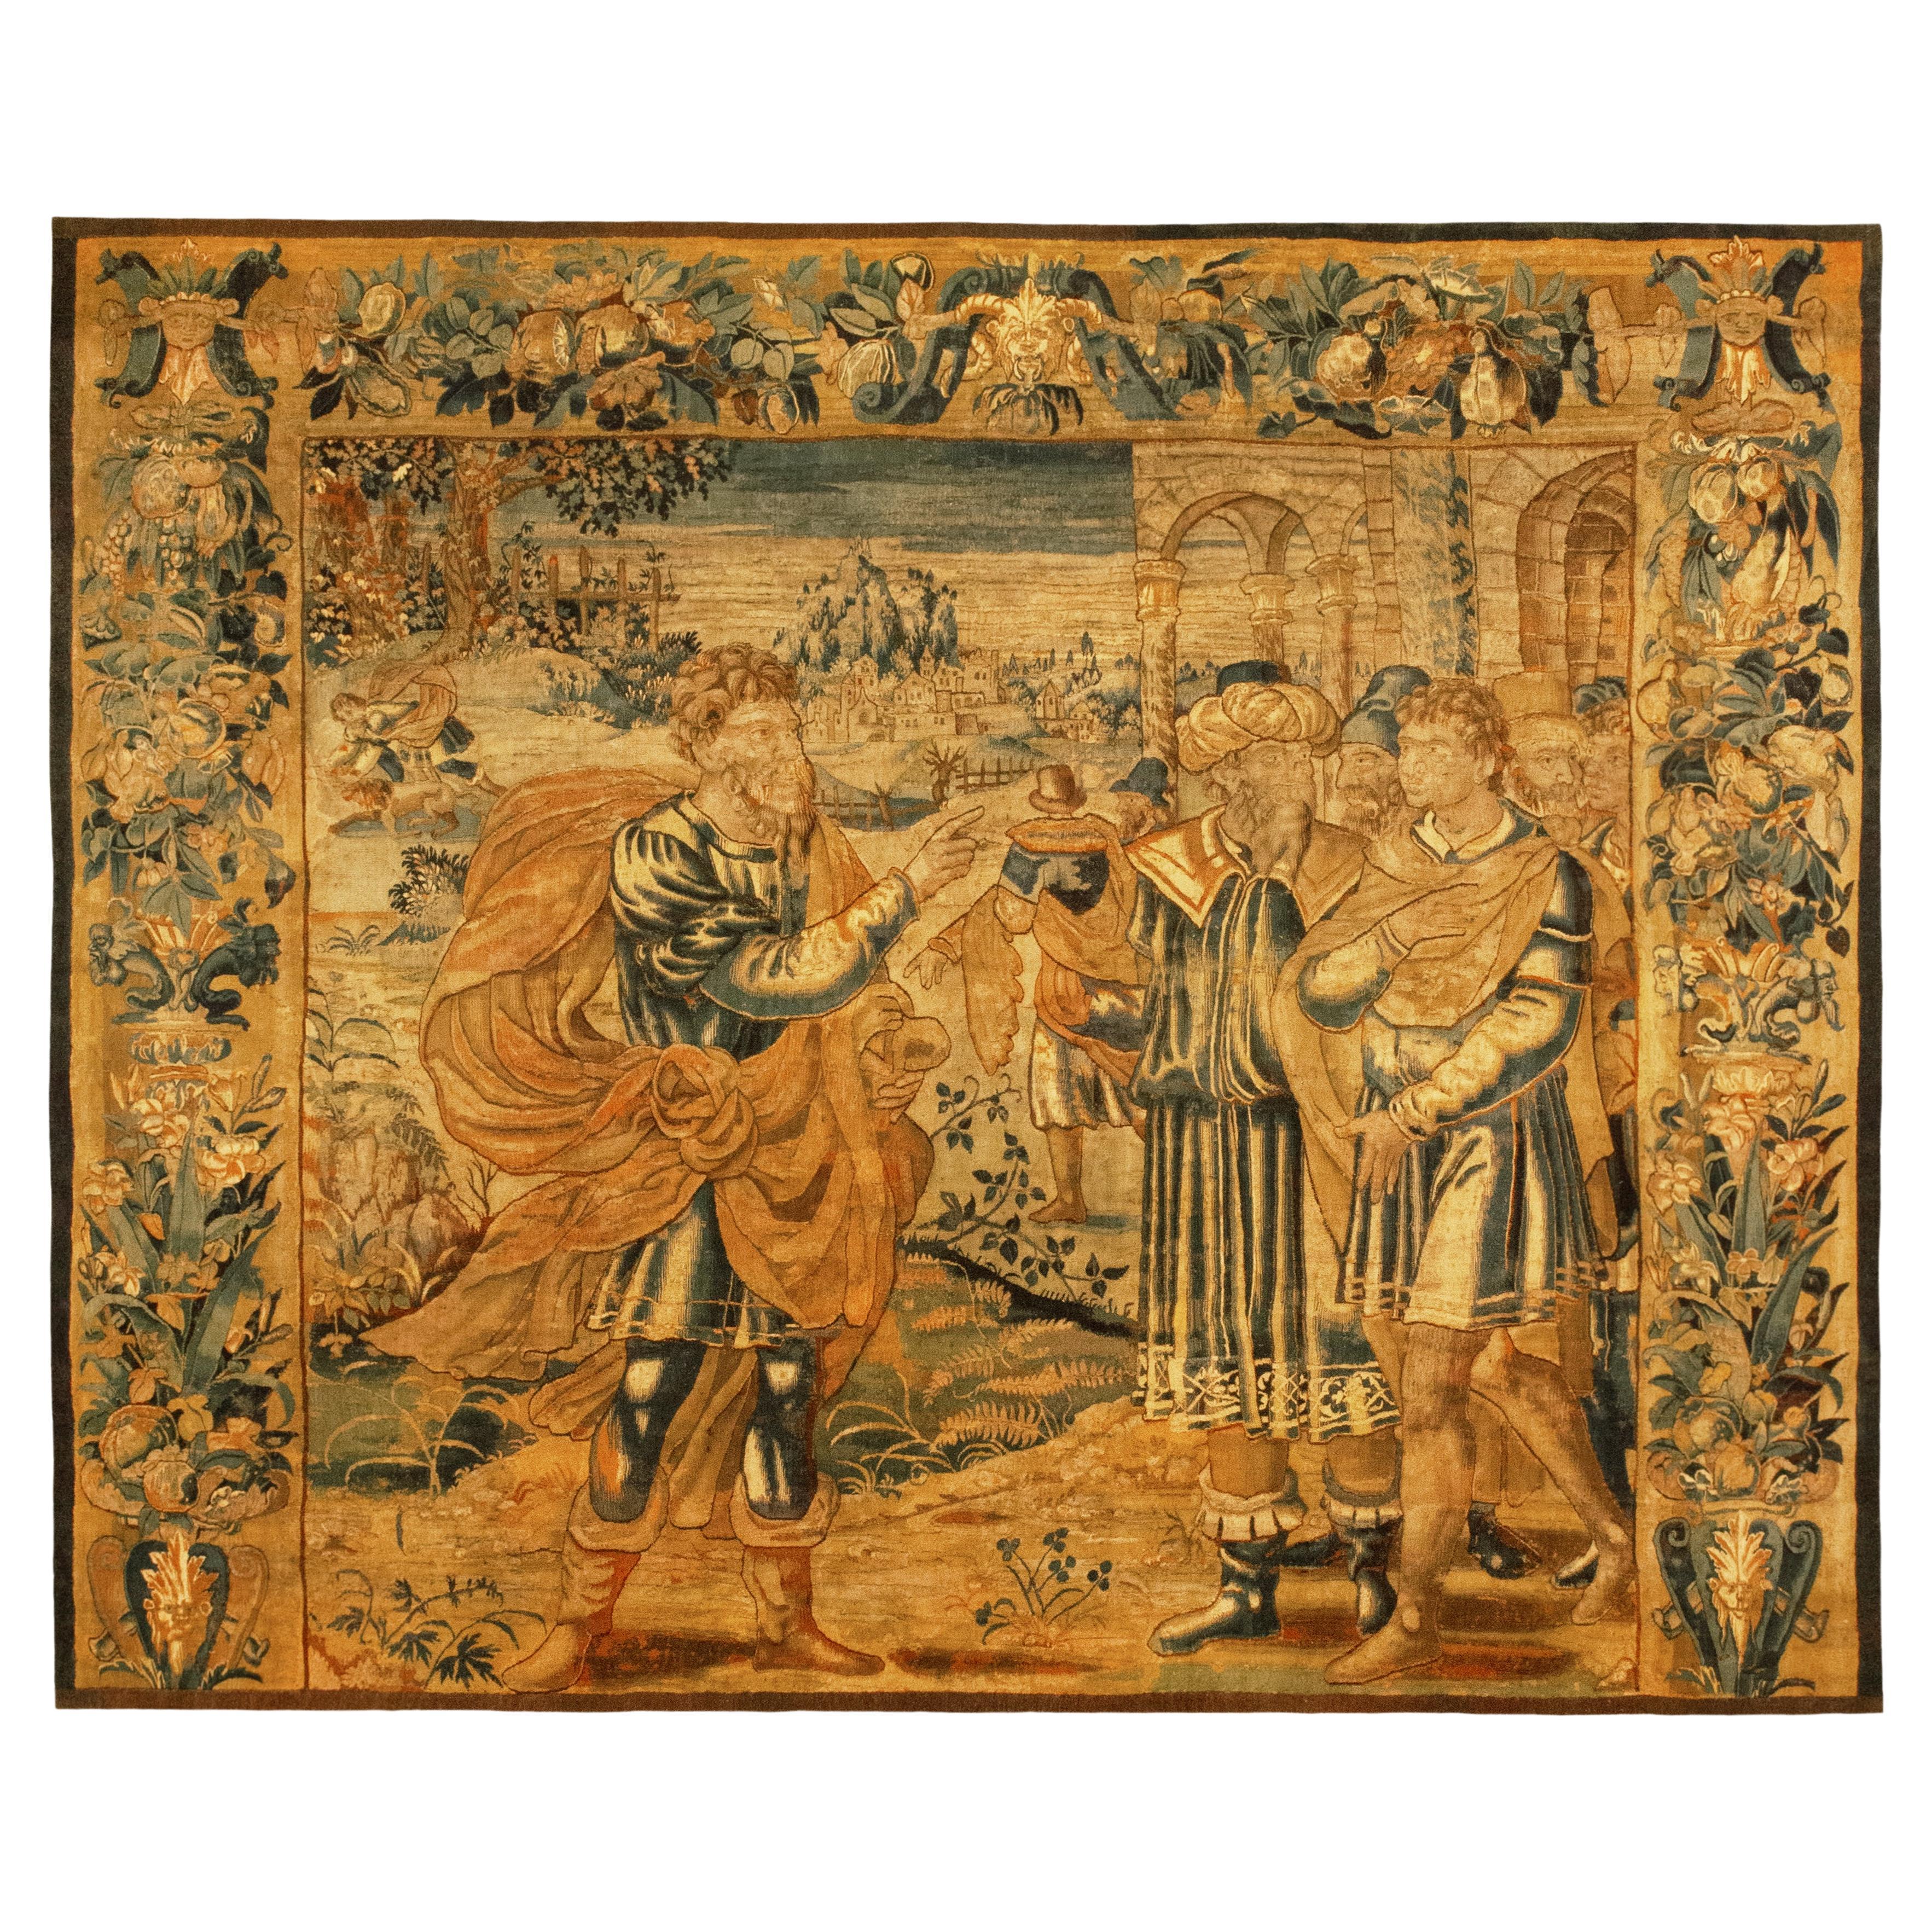 Late 16th Century Flemish Historical Tapestry, with the Roman General Scipio